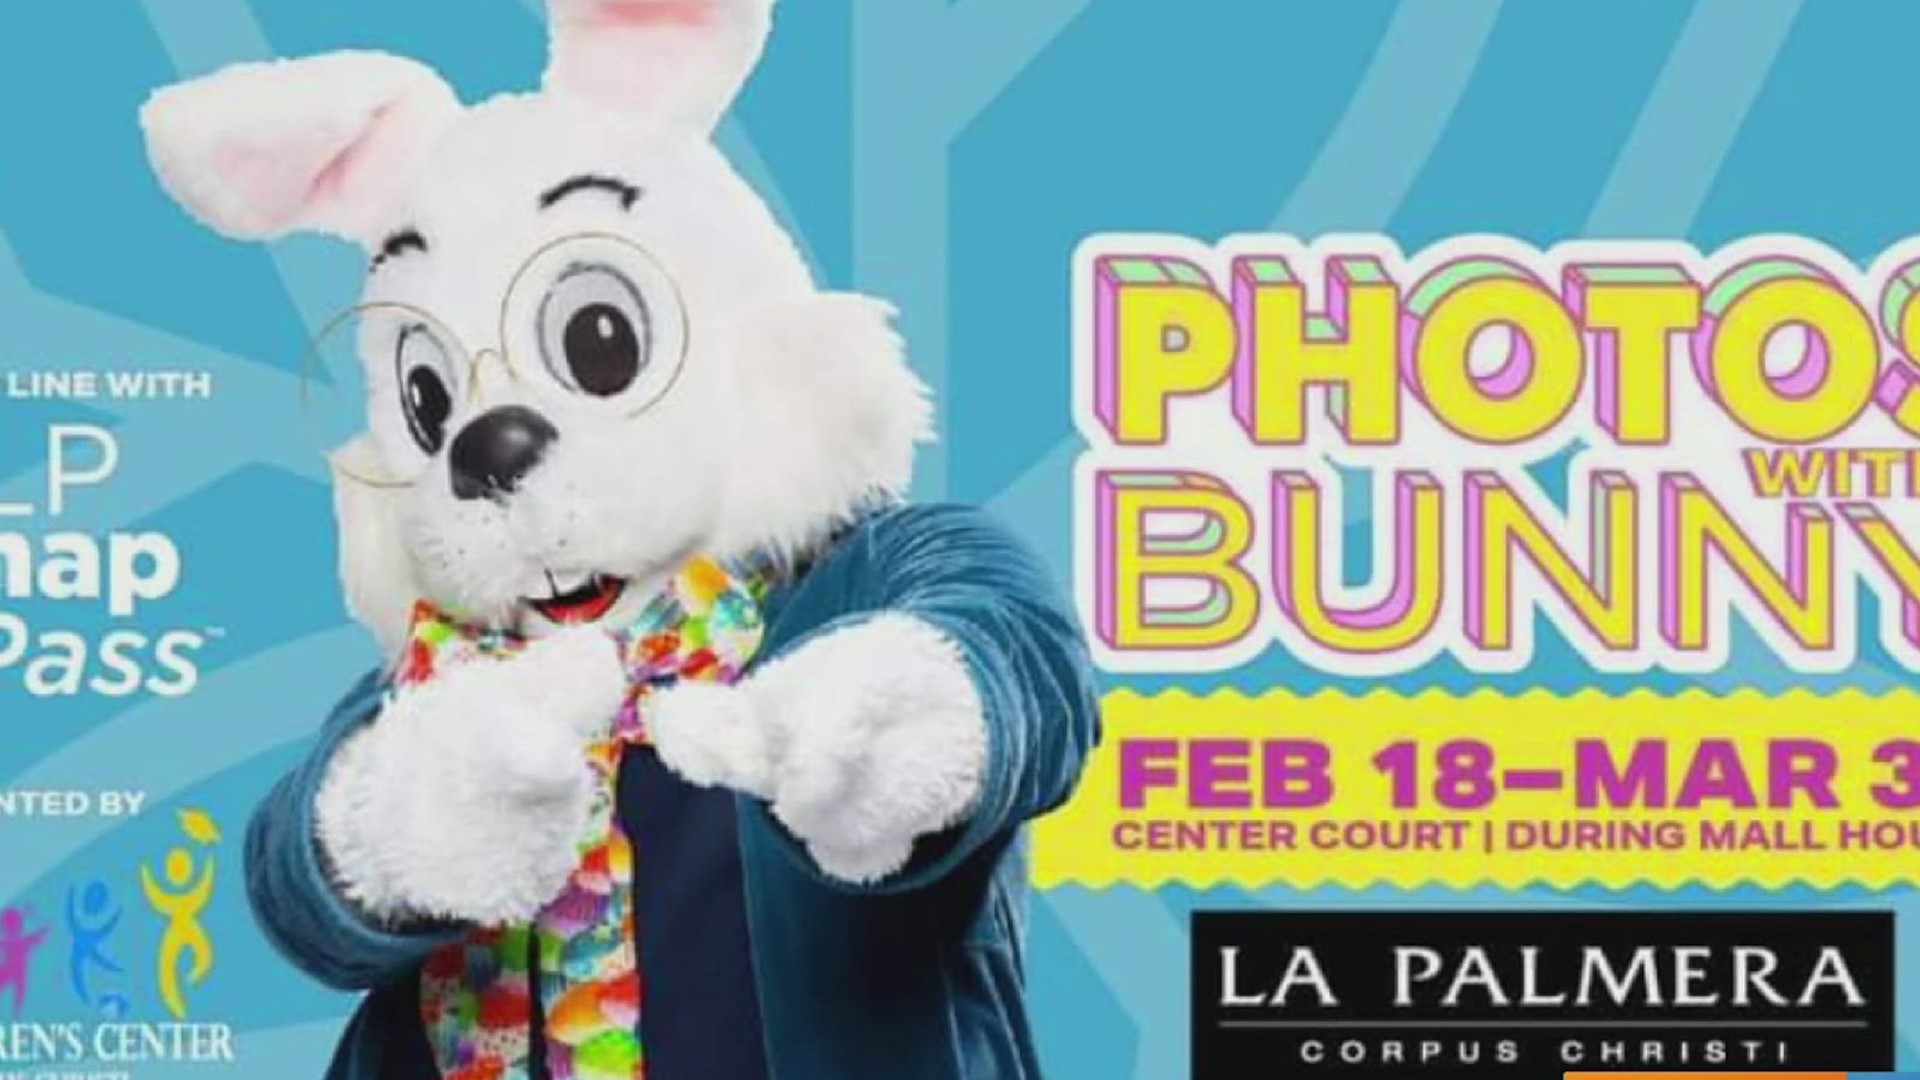 The furry guy is available to meet the kiddos and pose for pictures through Mar. 30 at the Center Court.